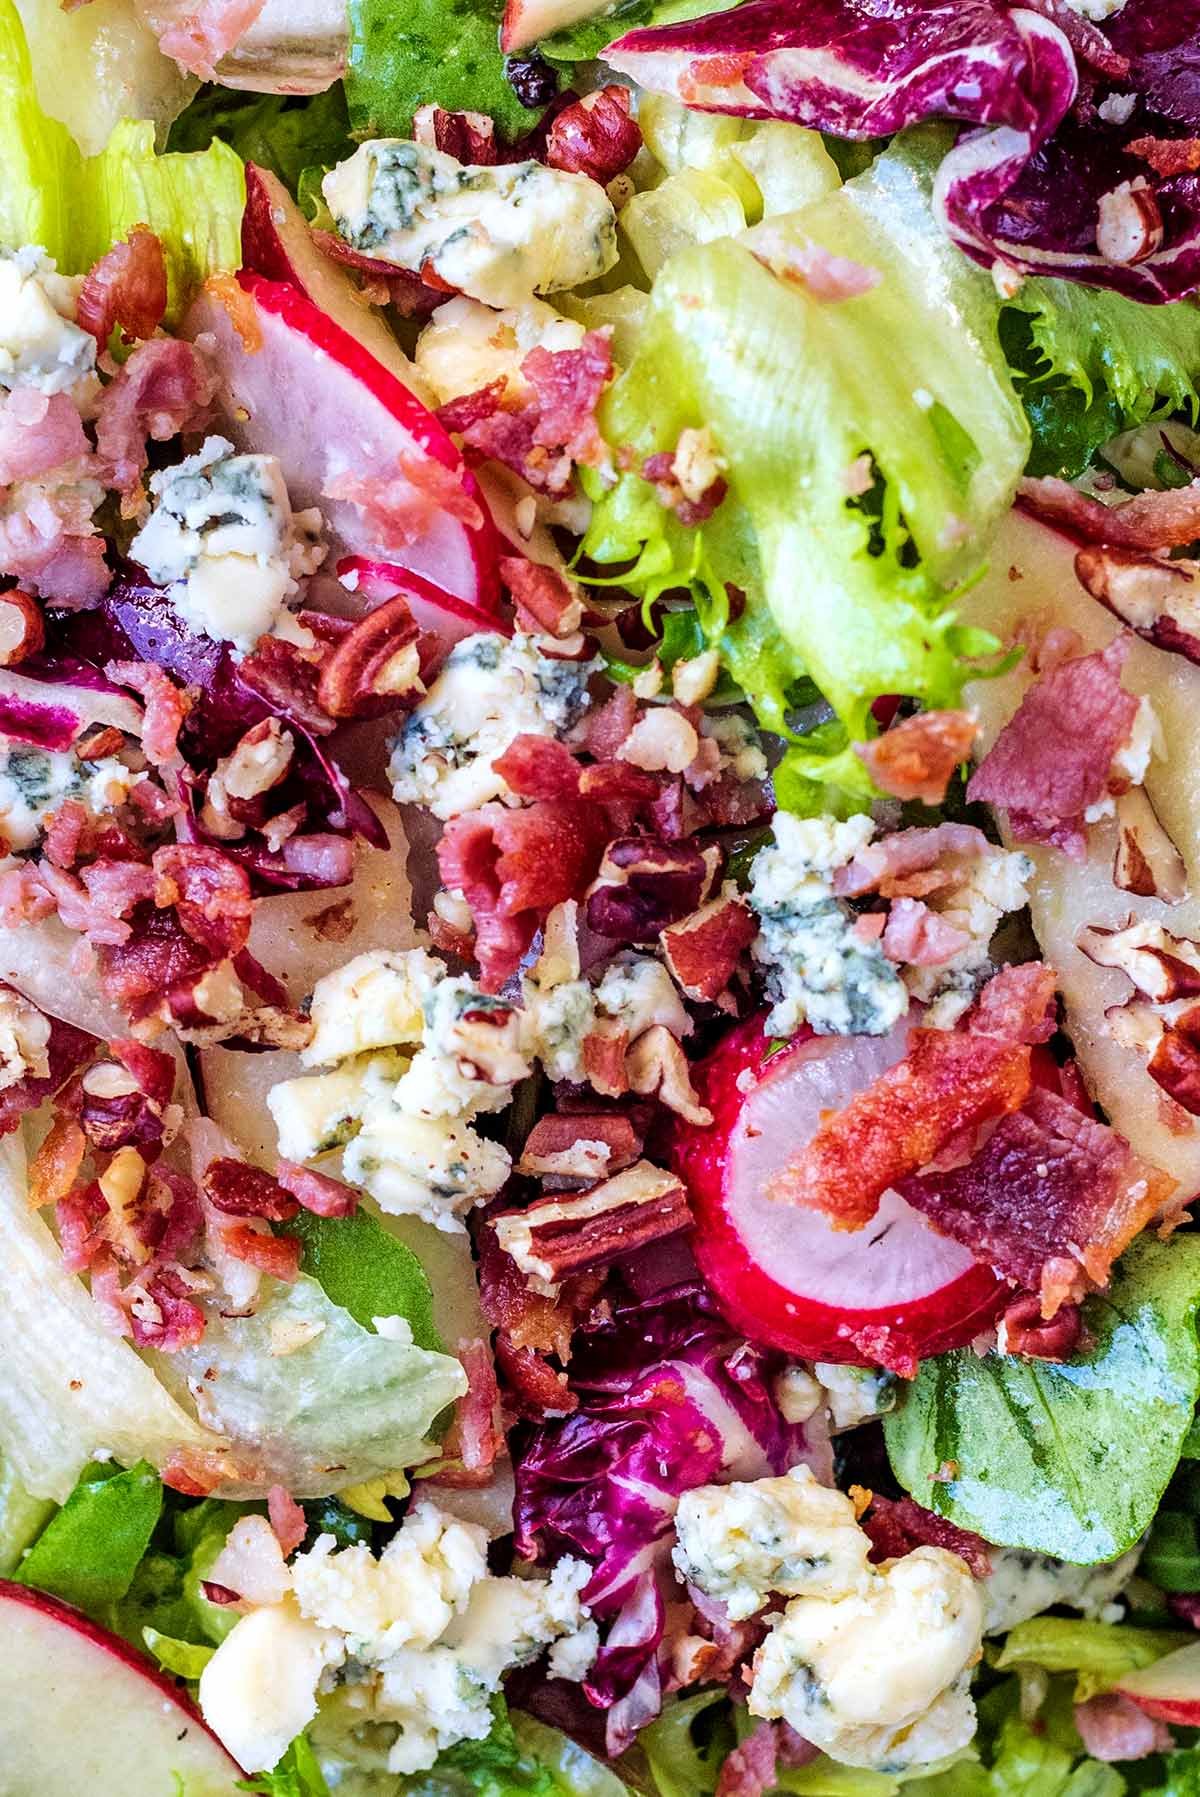 Chopped bacon and crumbled blue cheese on top of salad leaves.